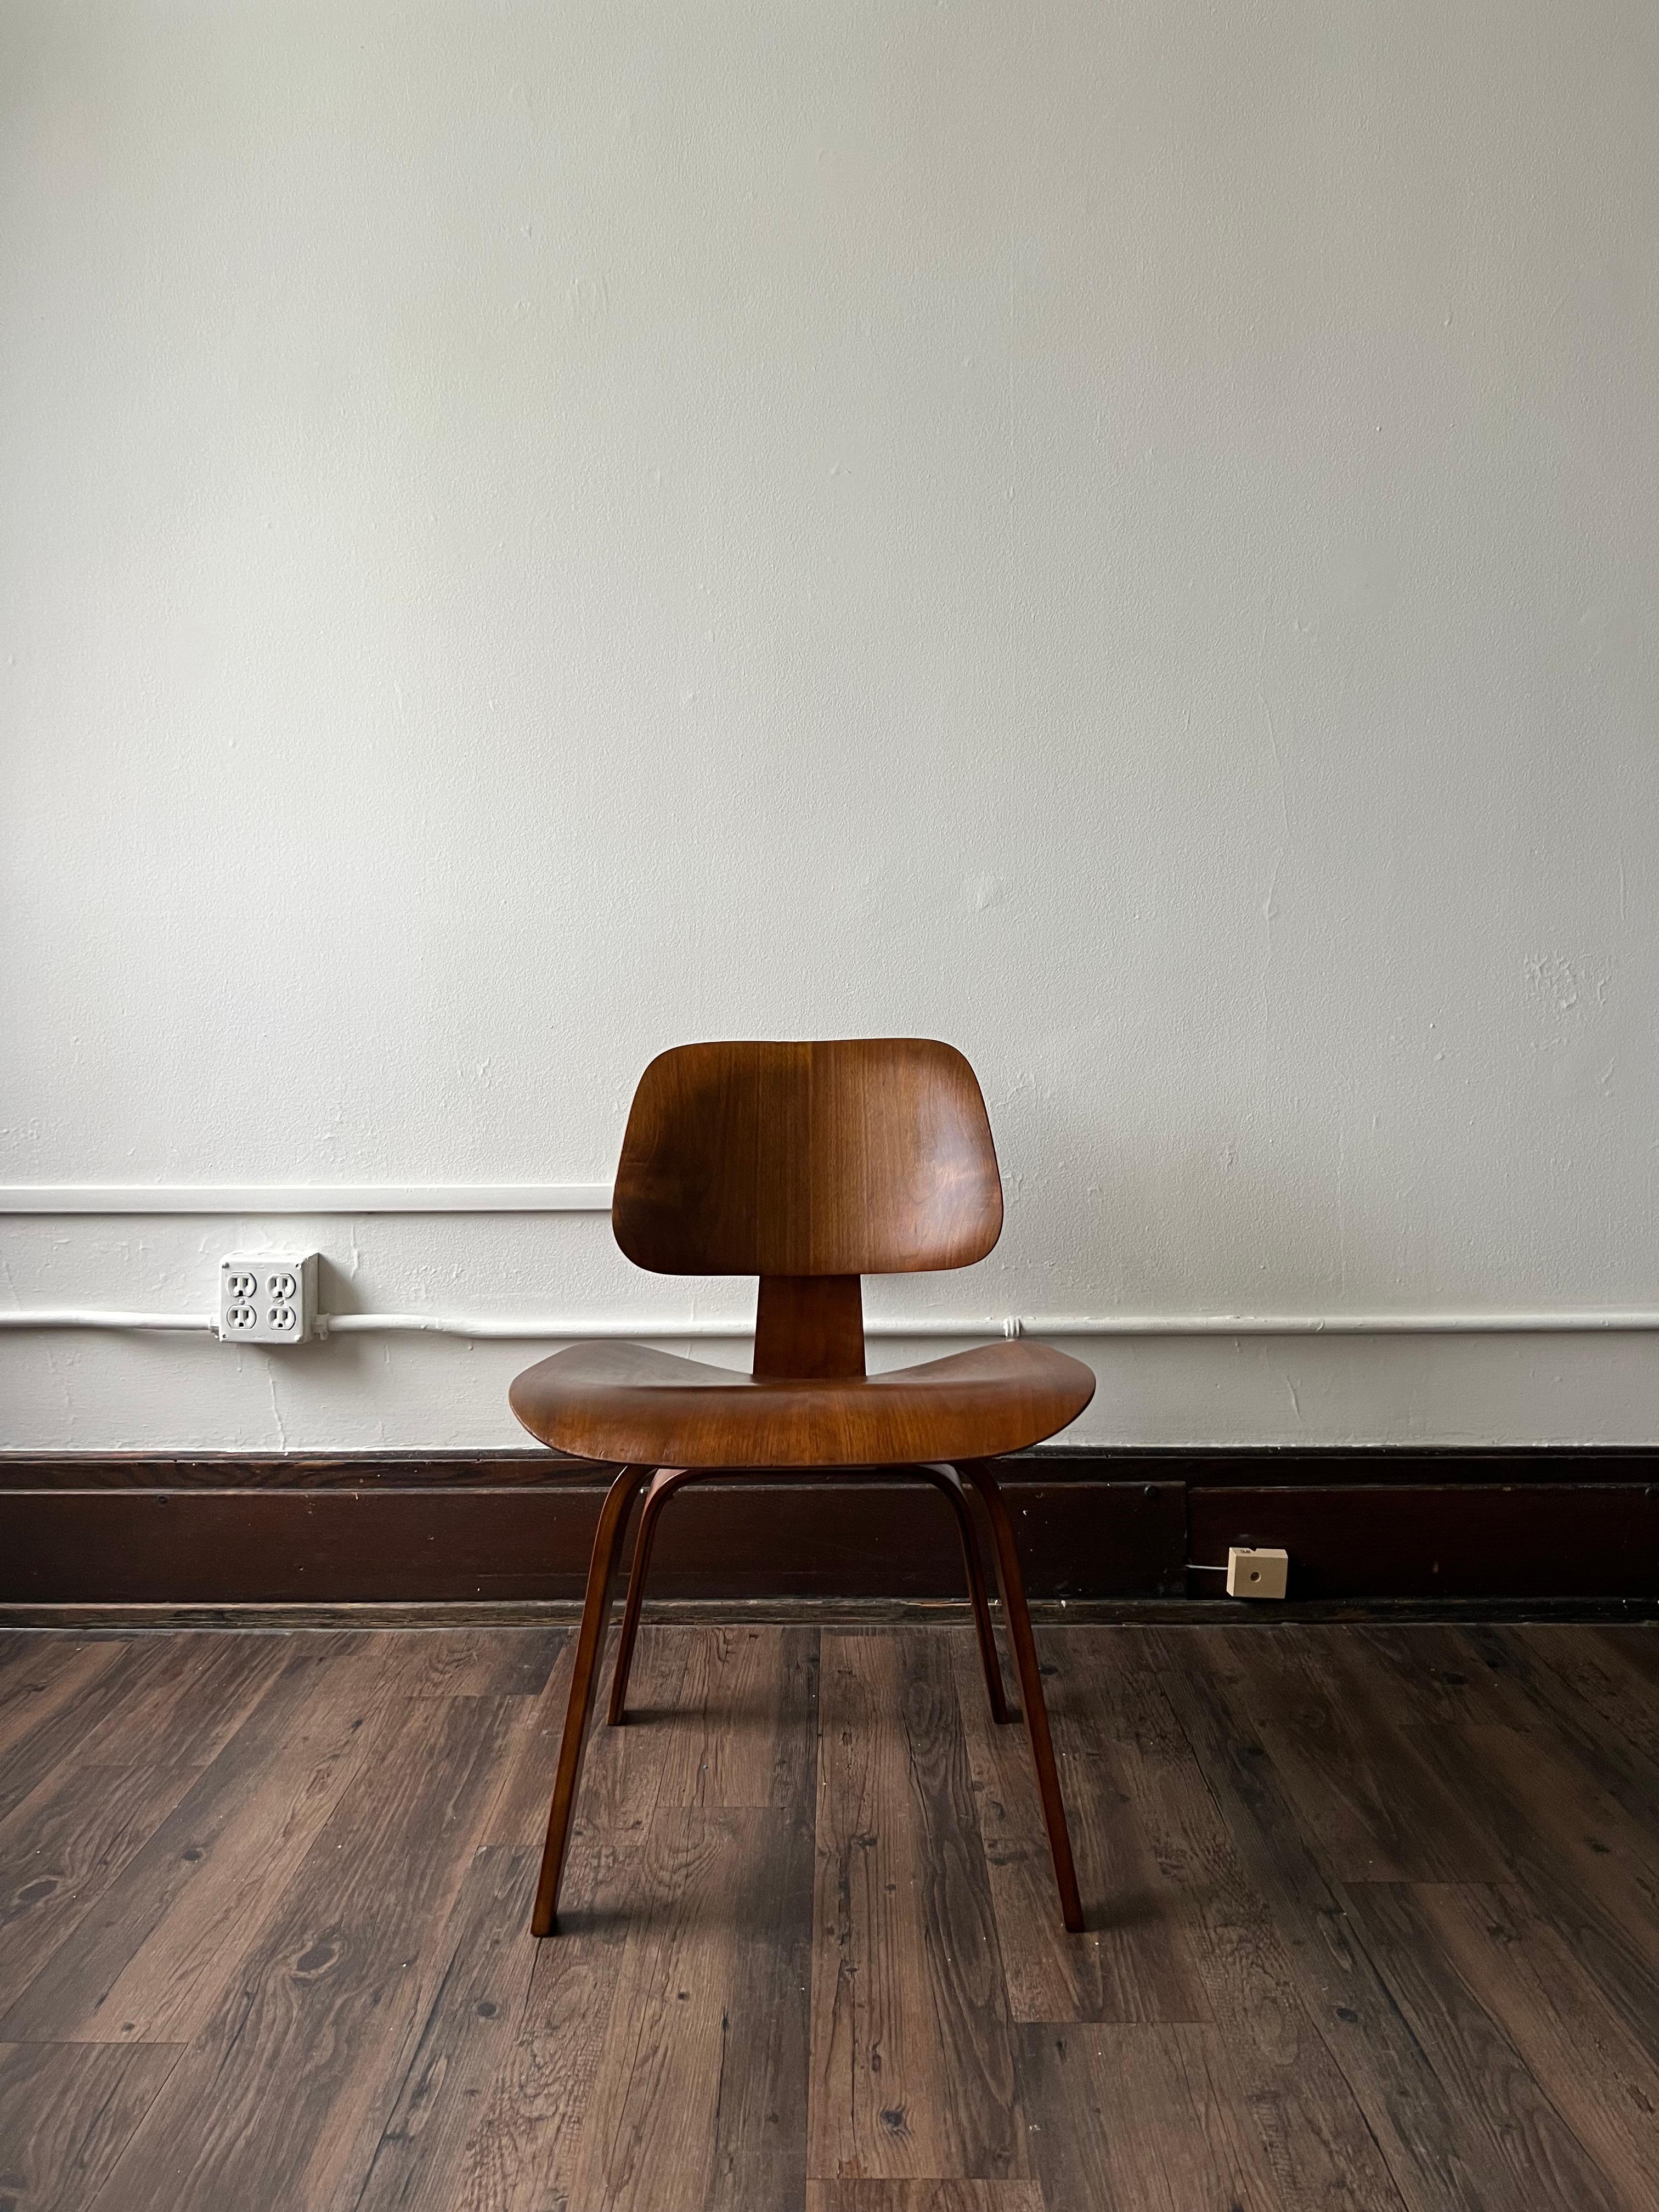 The first chair by Charles and Ray Eames, the DCW changed mid century modernism forever. This ash example is unmarked but has the 5-2-5 screw pattern that is documented and well known to be of Evans Products production.